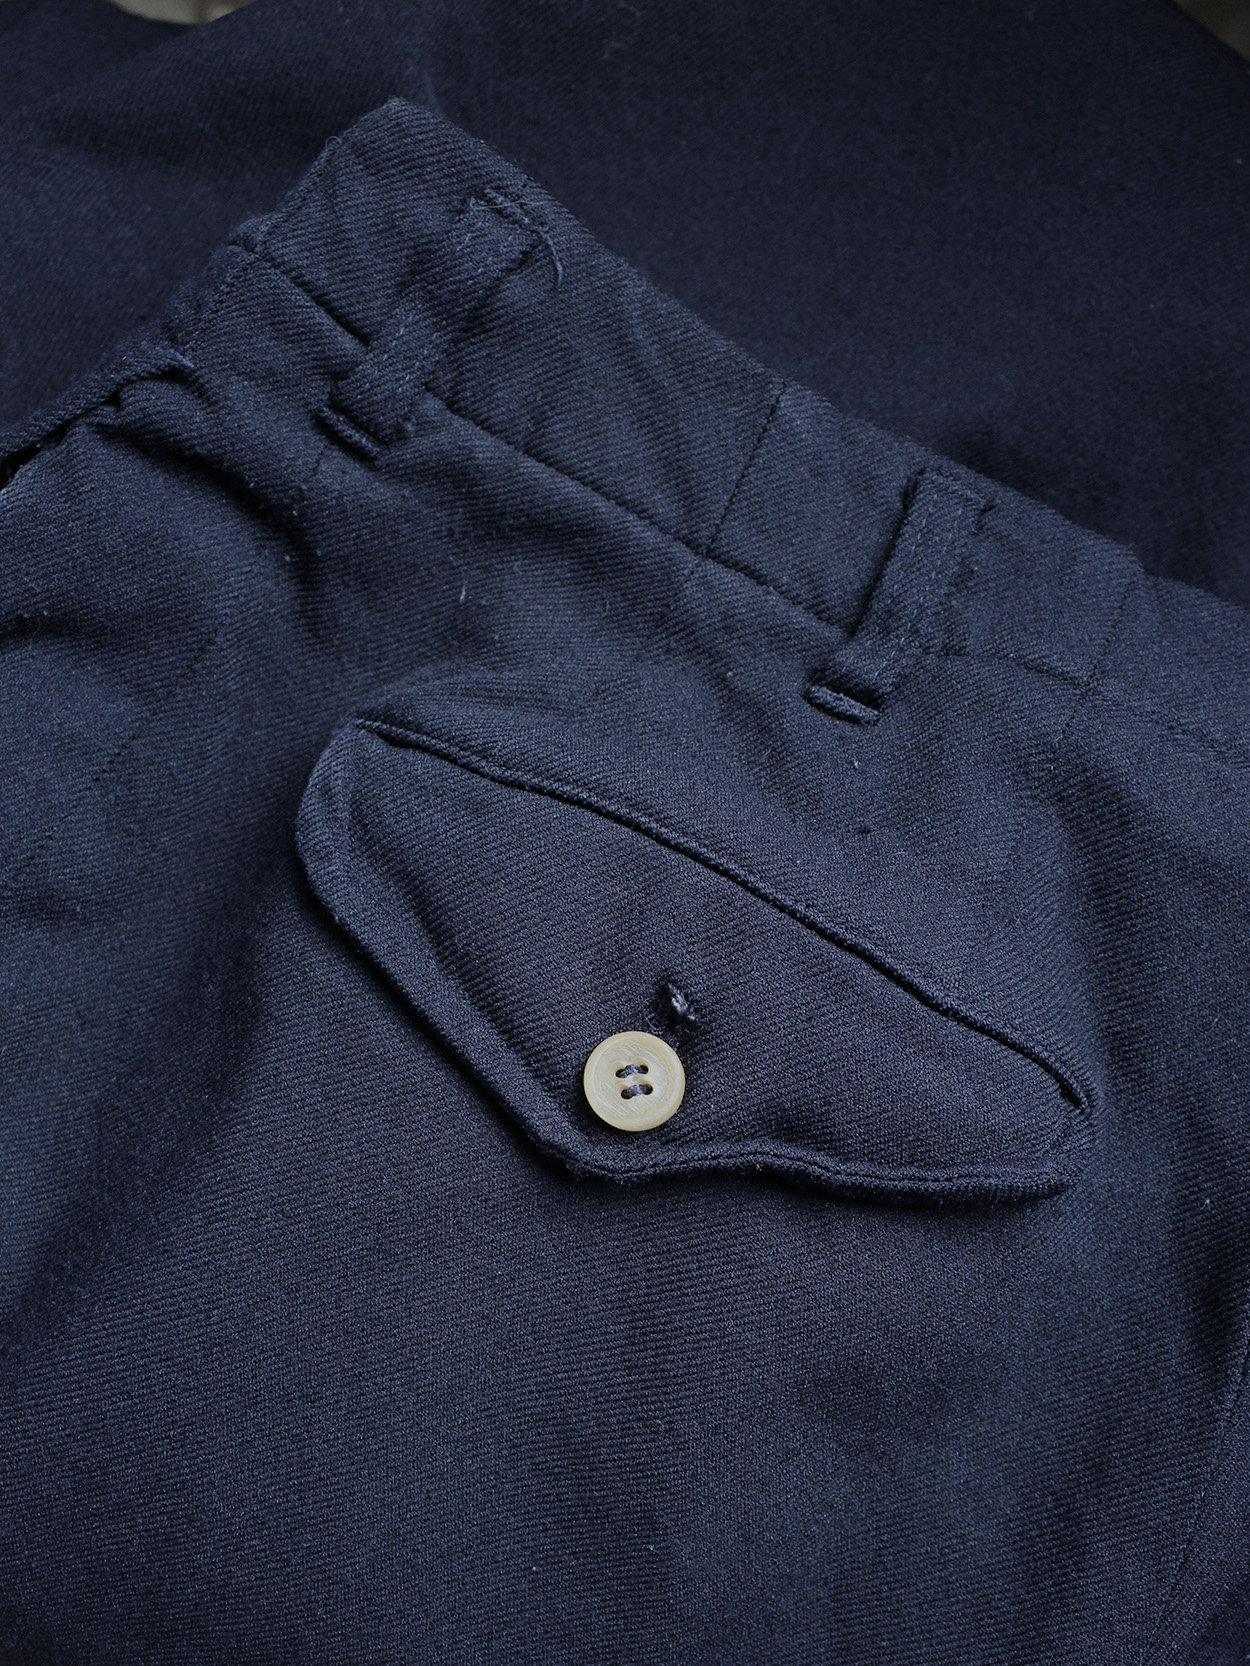 Comme des Garçons blue trousers with skirted front panel — spring 2002 ...